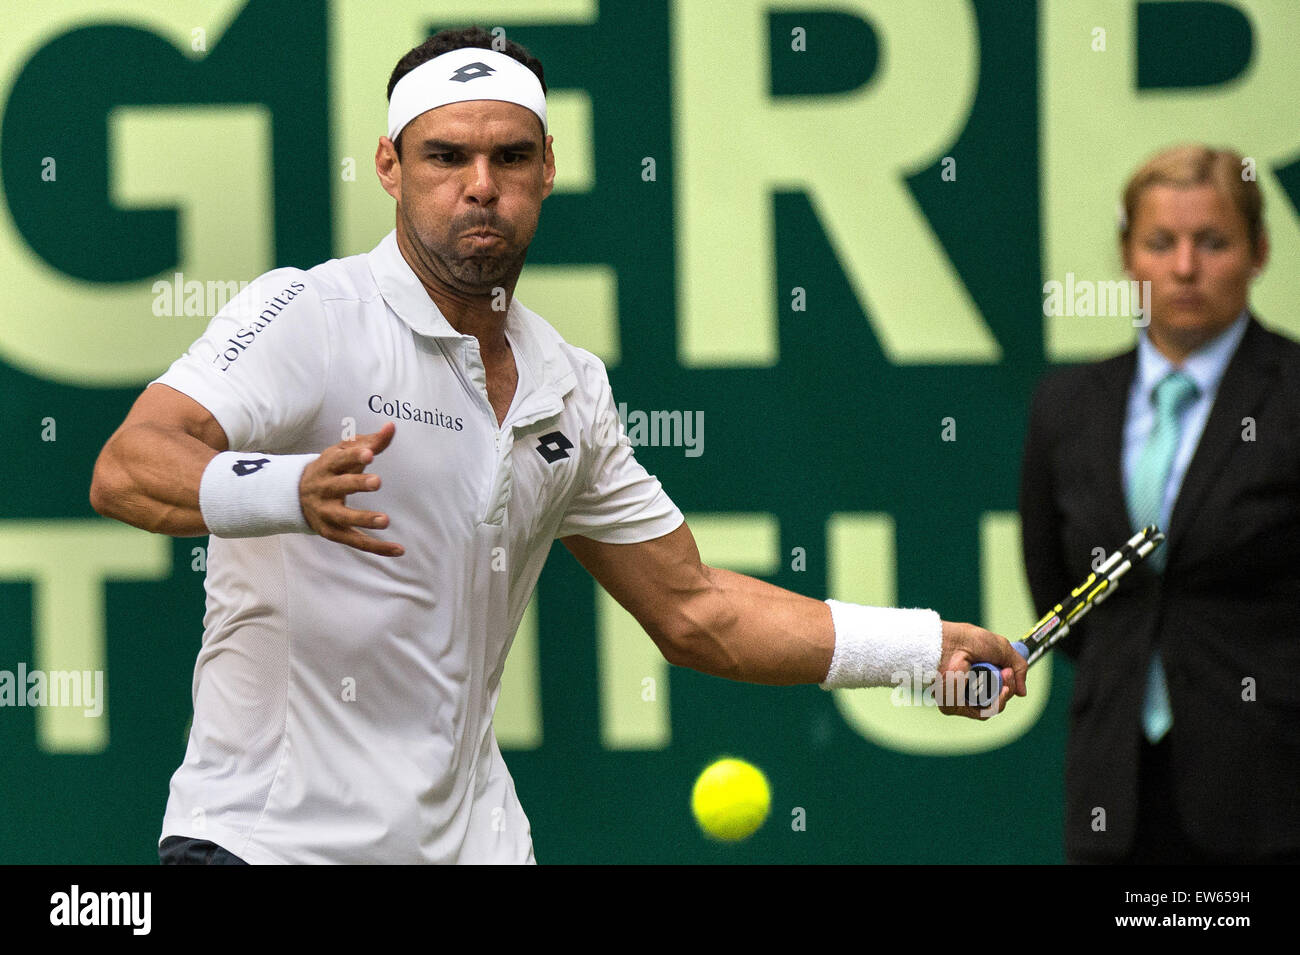 Halle, Germany. 18th June, 2015. Alejandro Falla of Colombia in action in the round of 16 match against Janowicz of Poland during the ATP tennis tournament in Halle, Germany, 18 June 2015. Photo: MAJA HITIJ/dpa/Alamy Live News Stock Photo